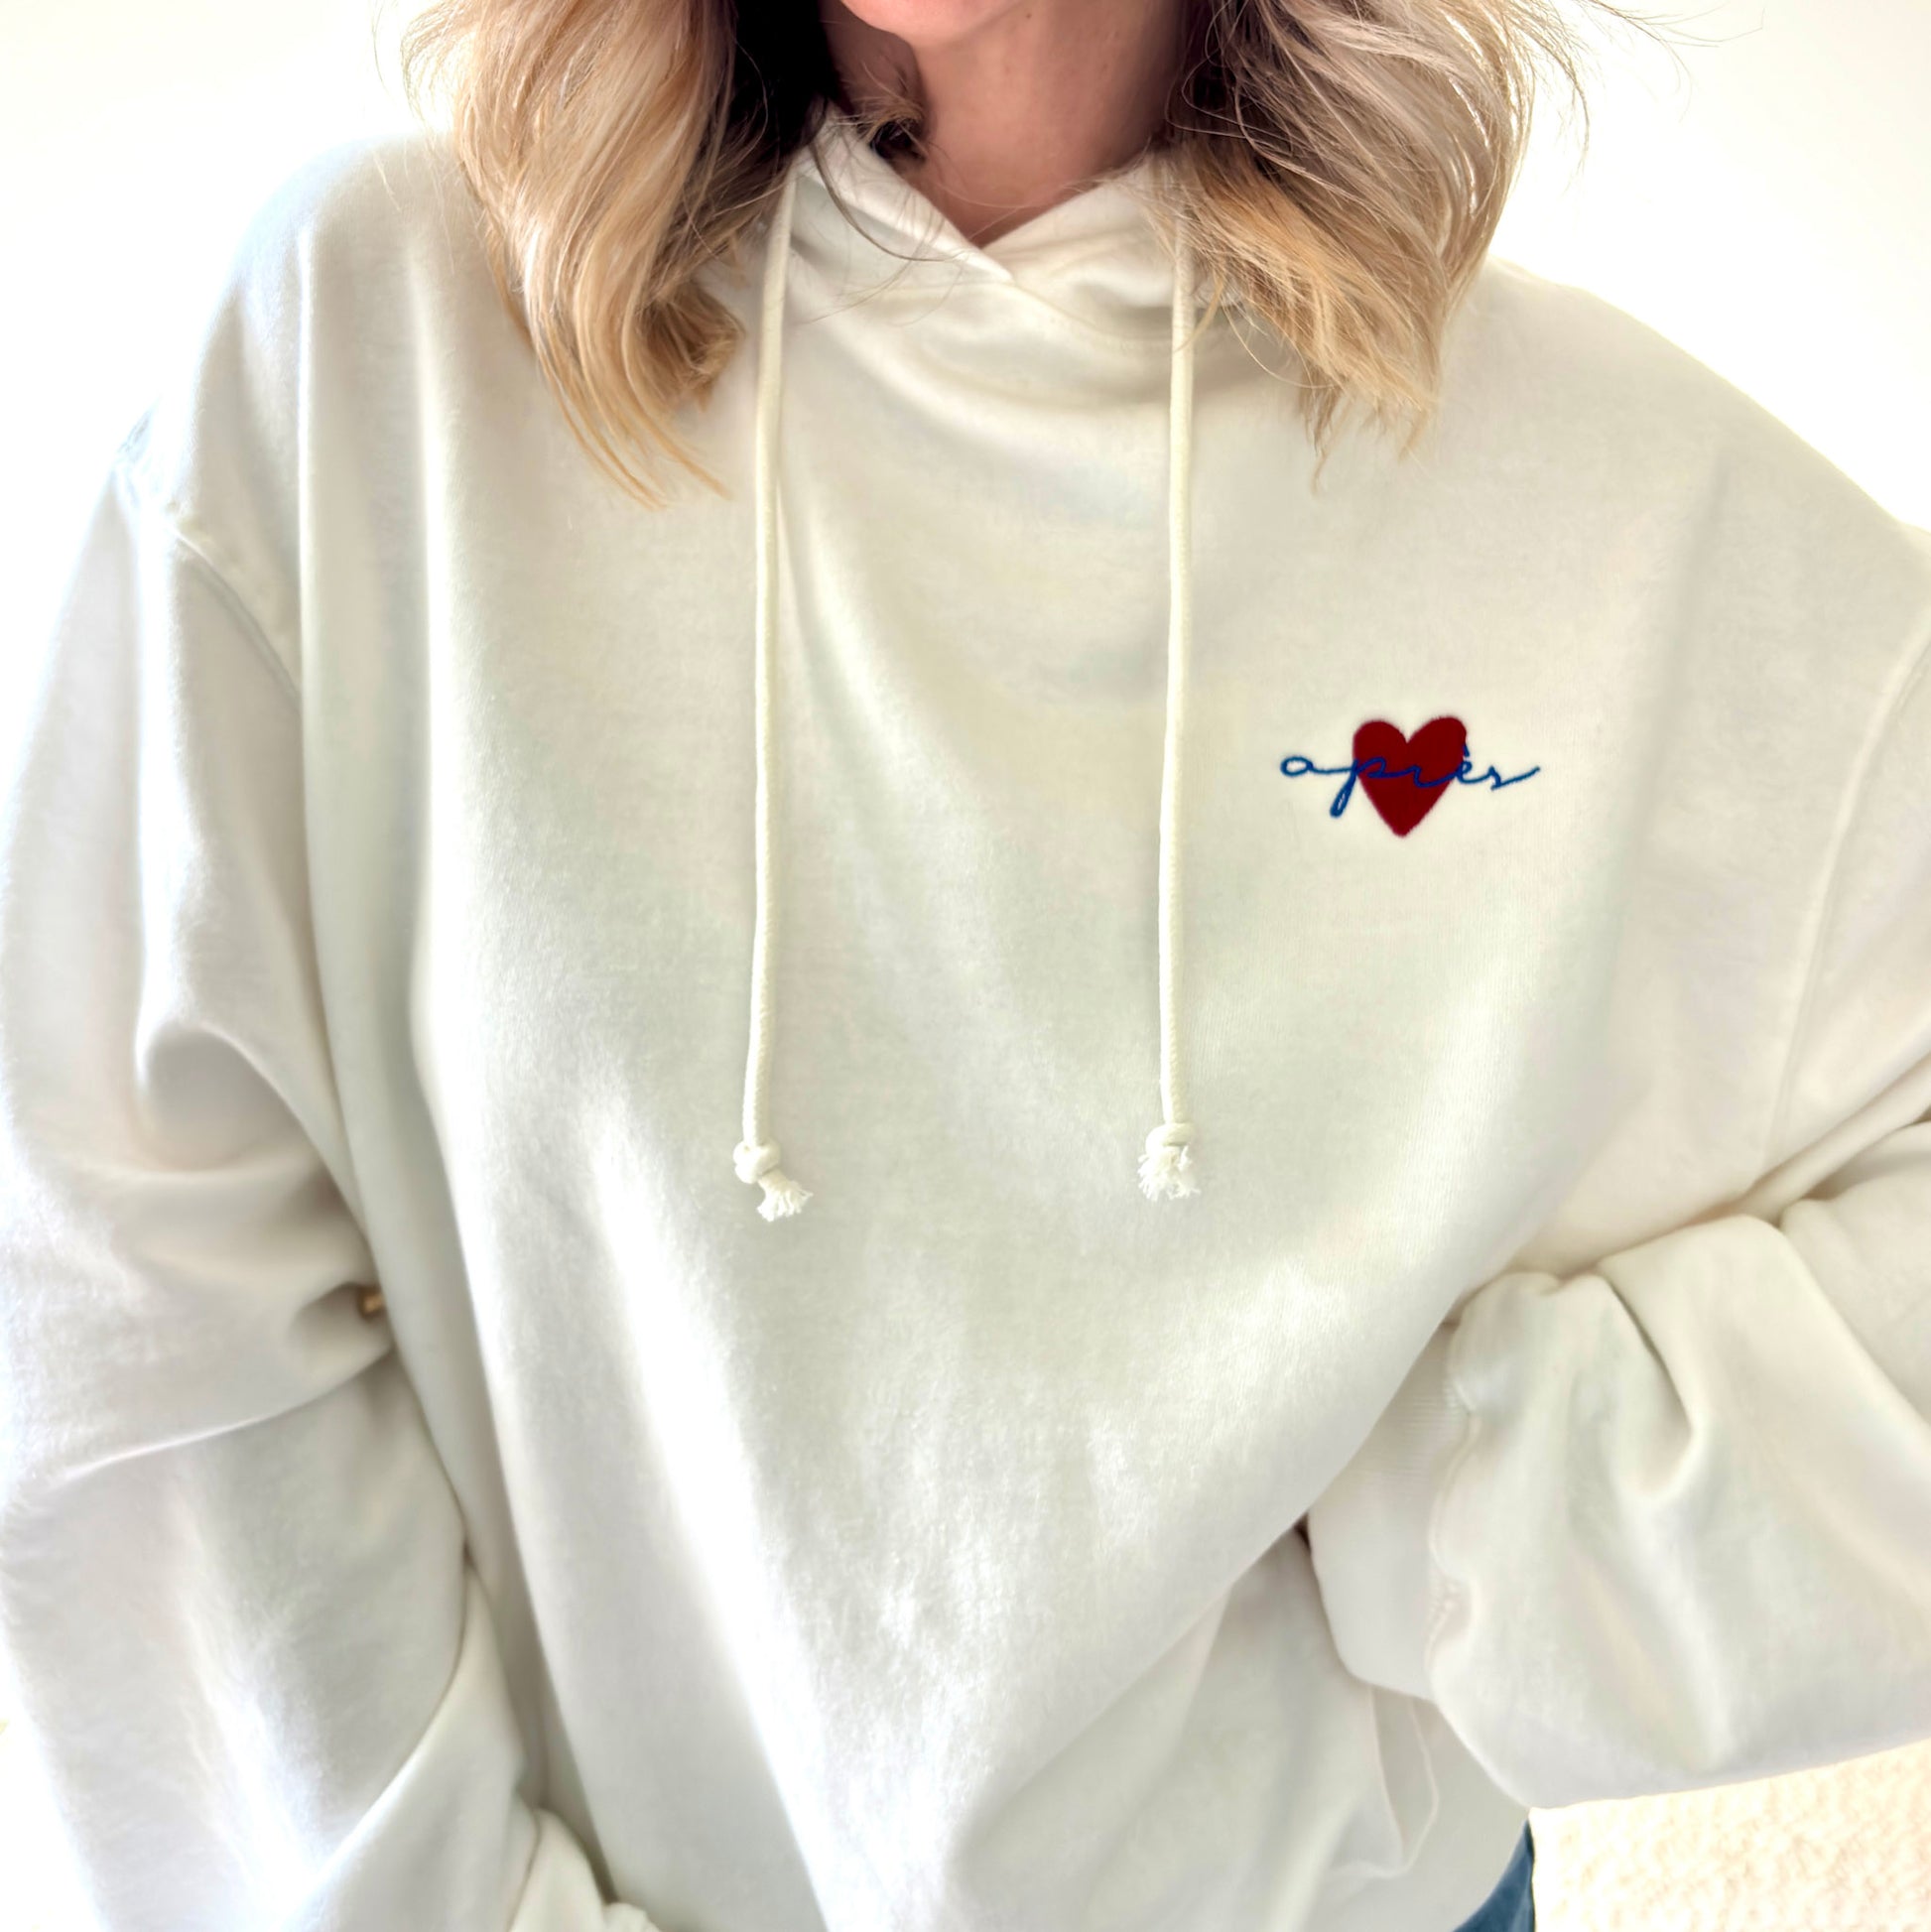 Women's ivory pullover hooded oversized light weight fleece sweatshirt with script après and heart embroidery